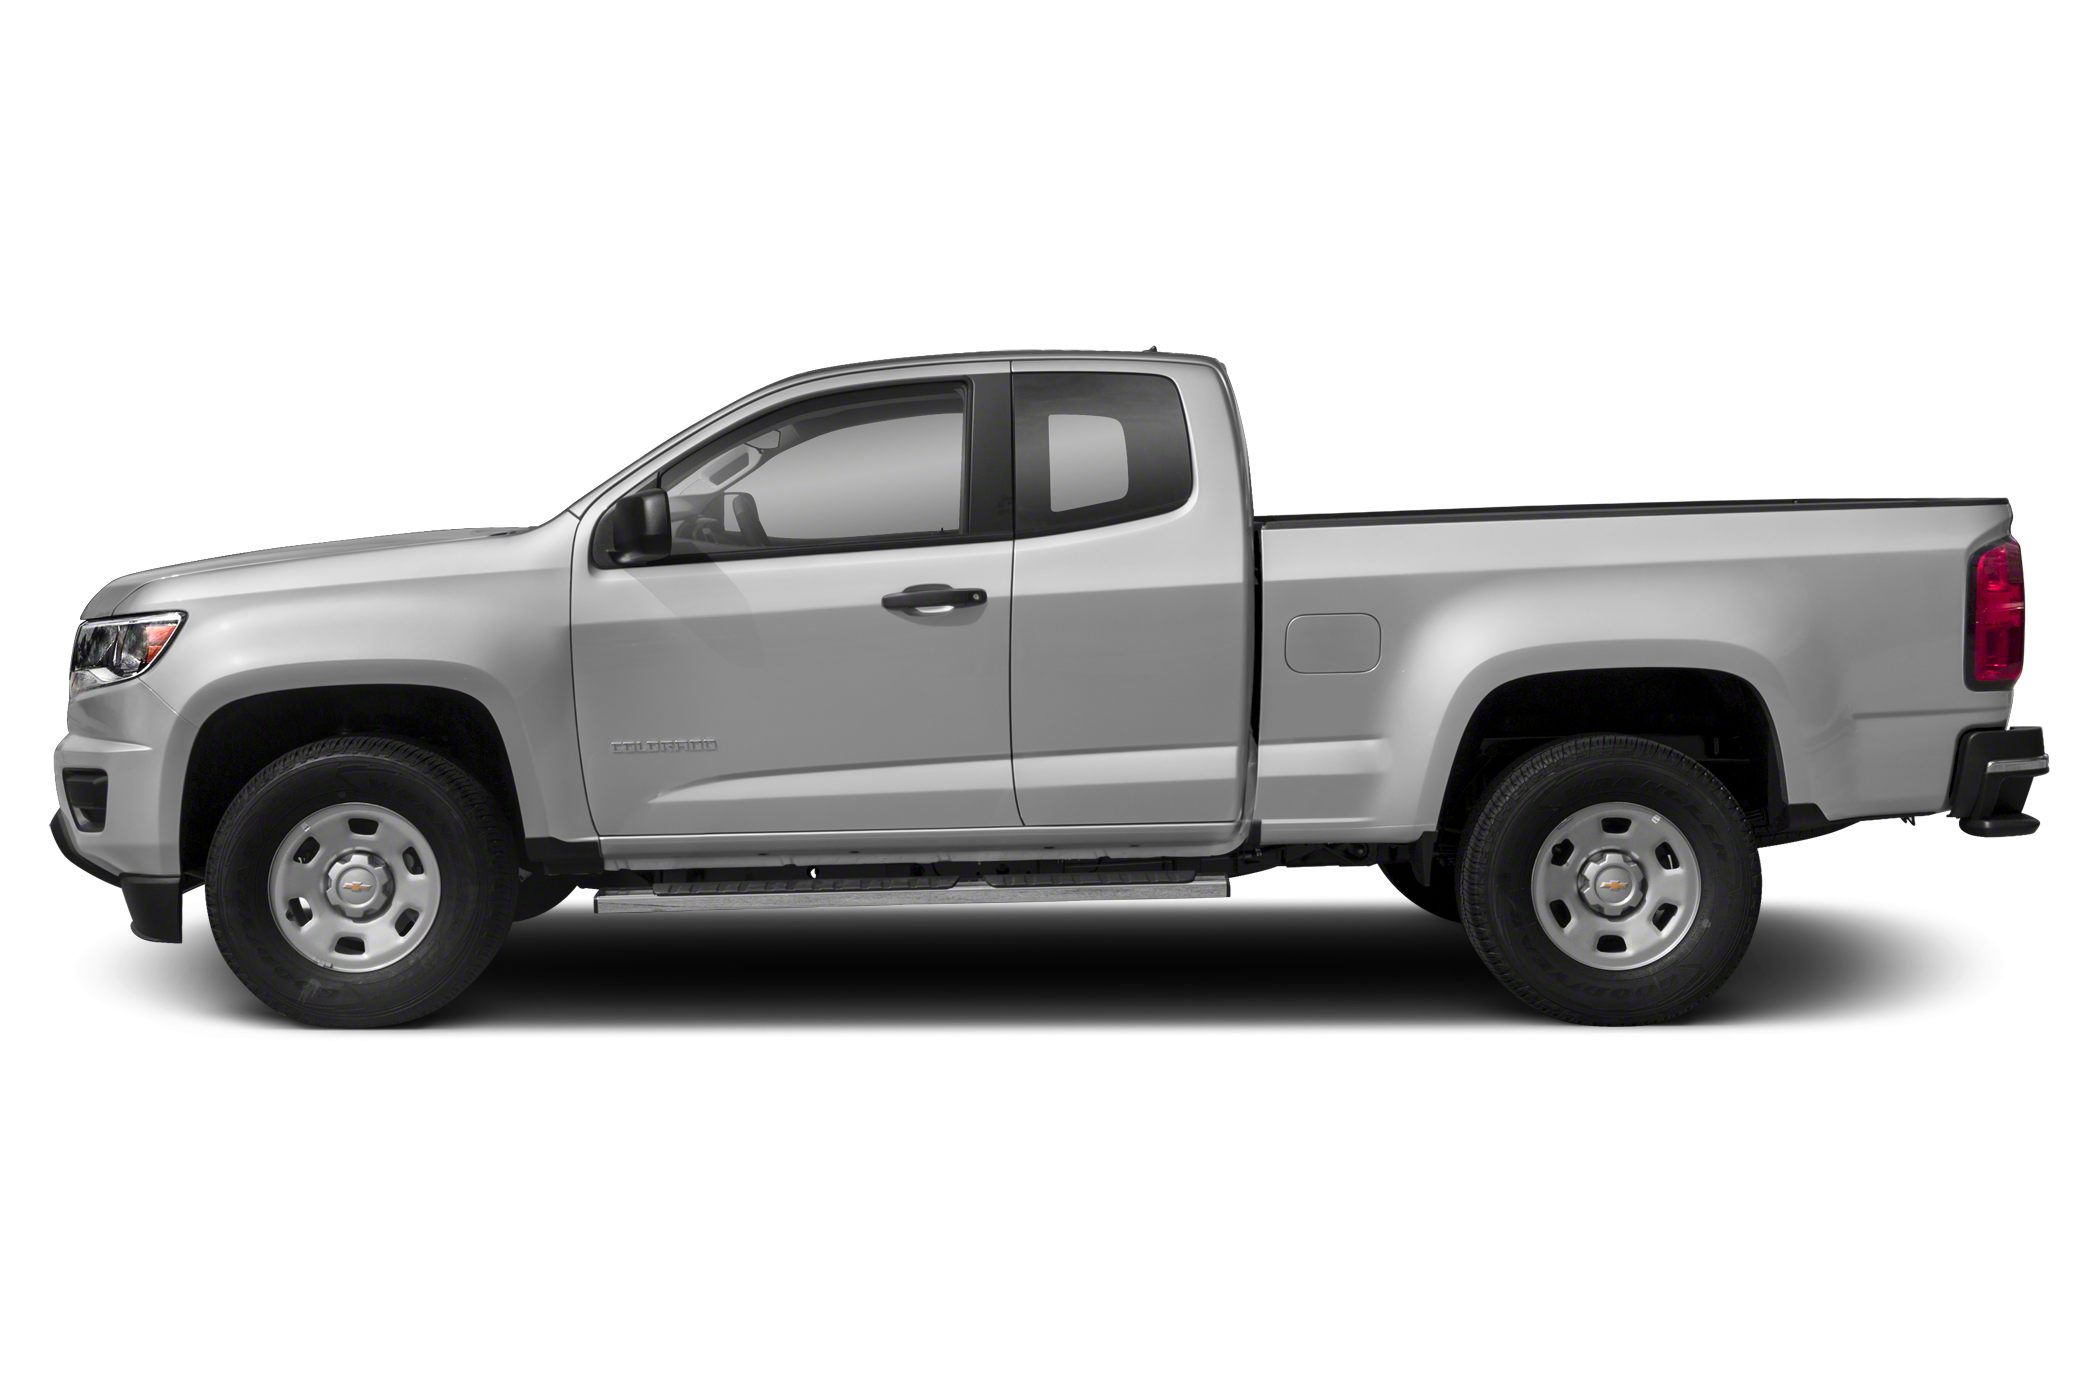 2020 Chevrolet Colorado Z71 4x4 Extended Cab 6 Ft Box 1283 In Wb